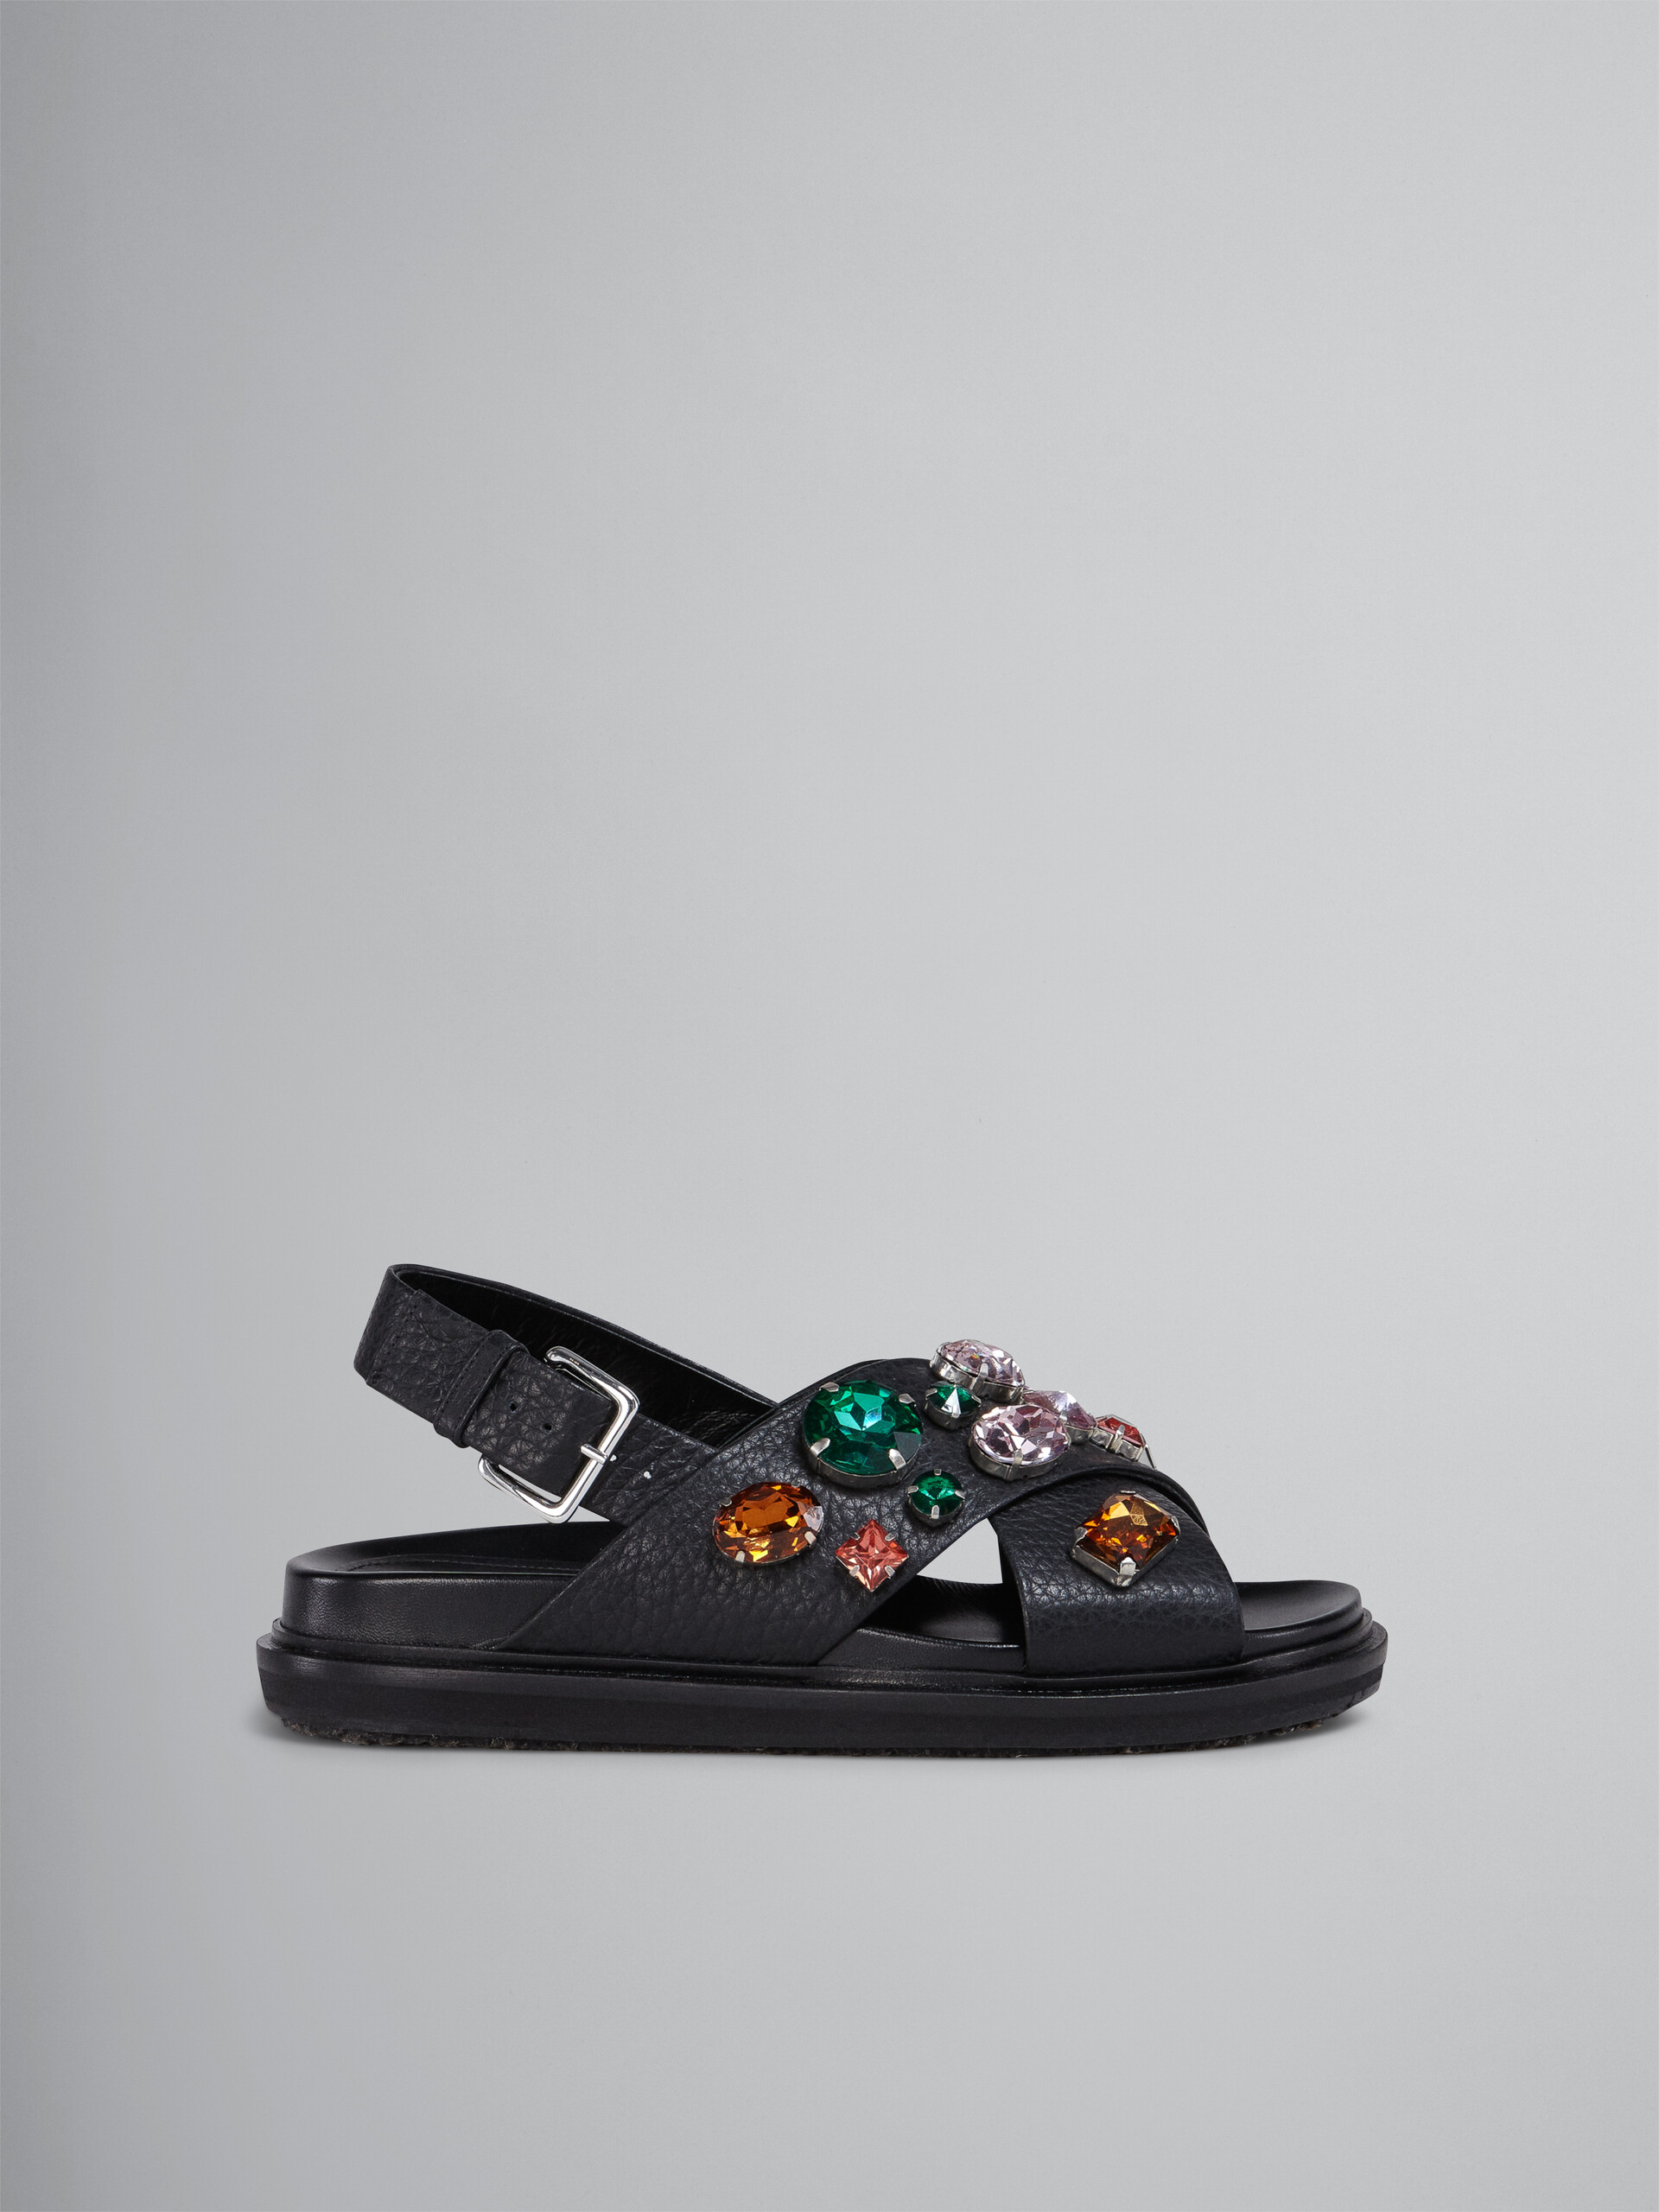 Black leather Fussbett with glass beads - Sandals - Image 1